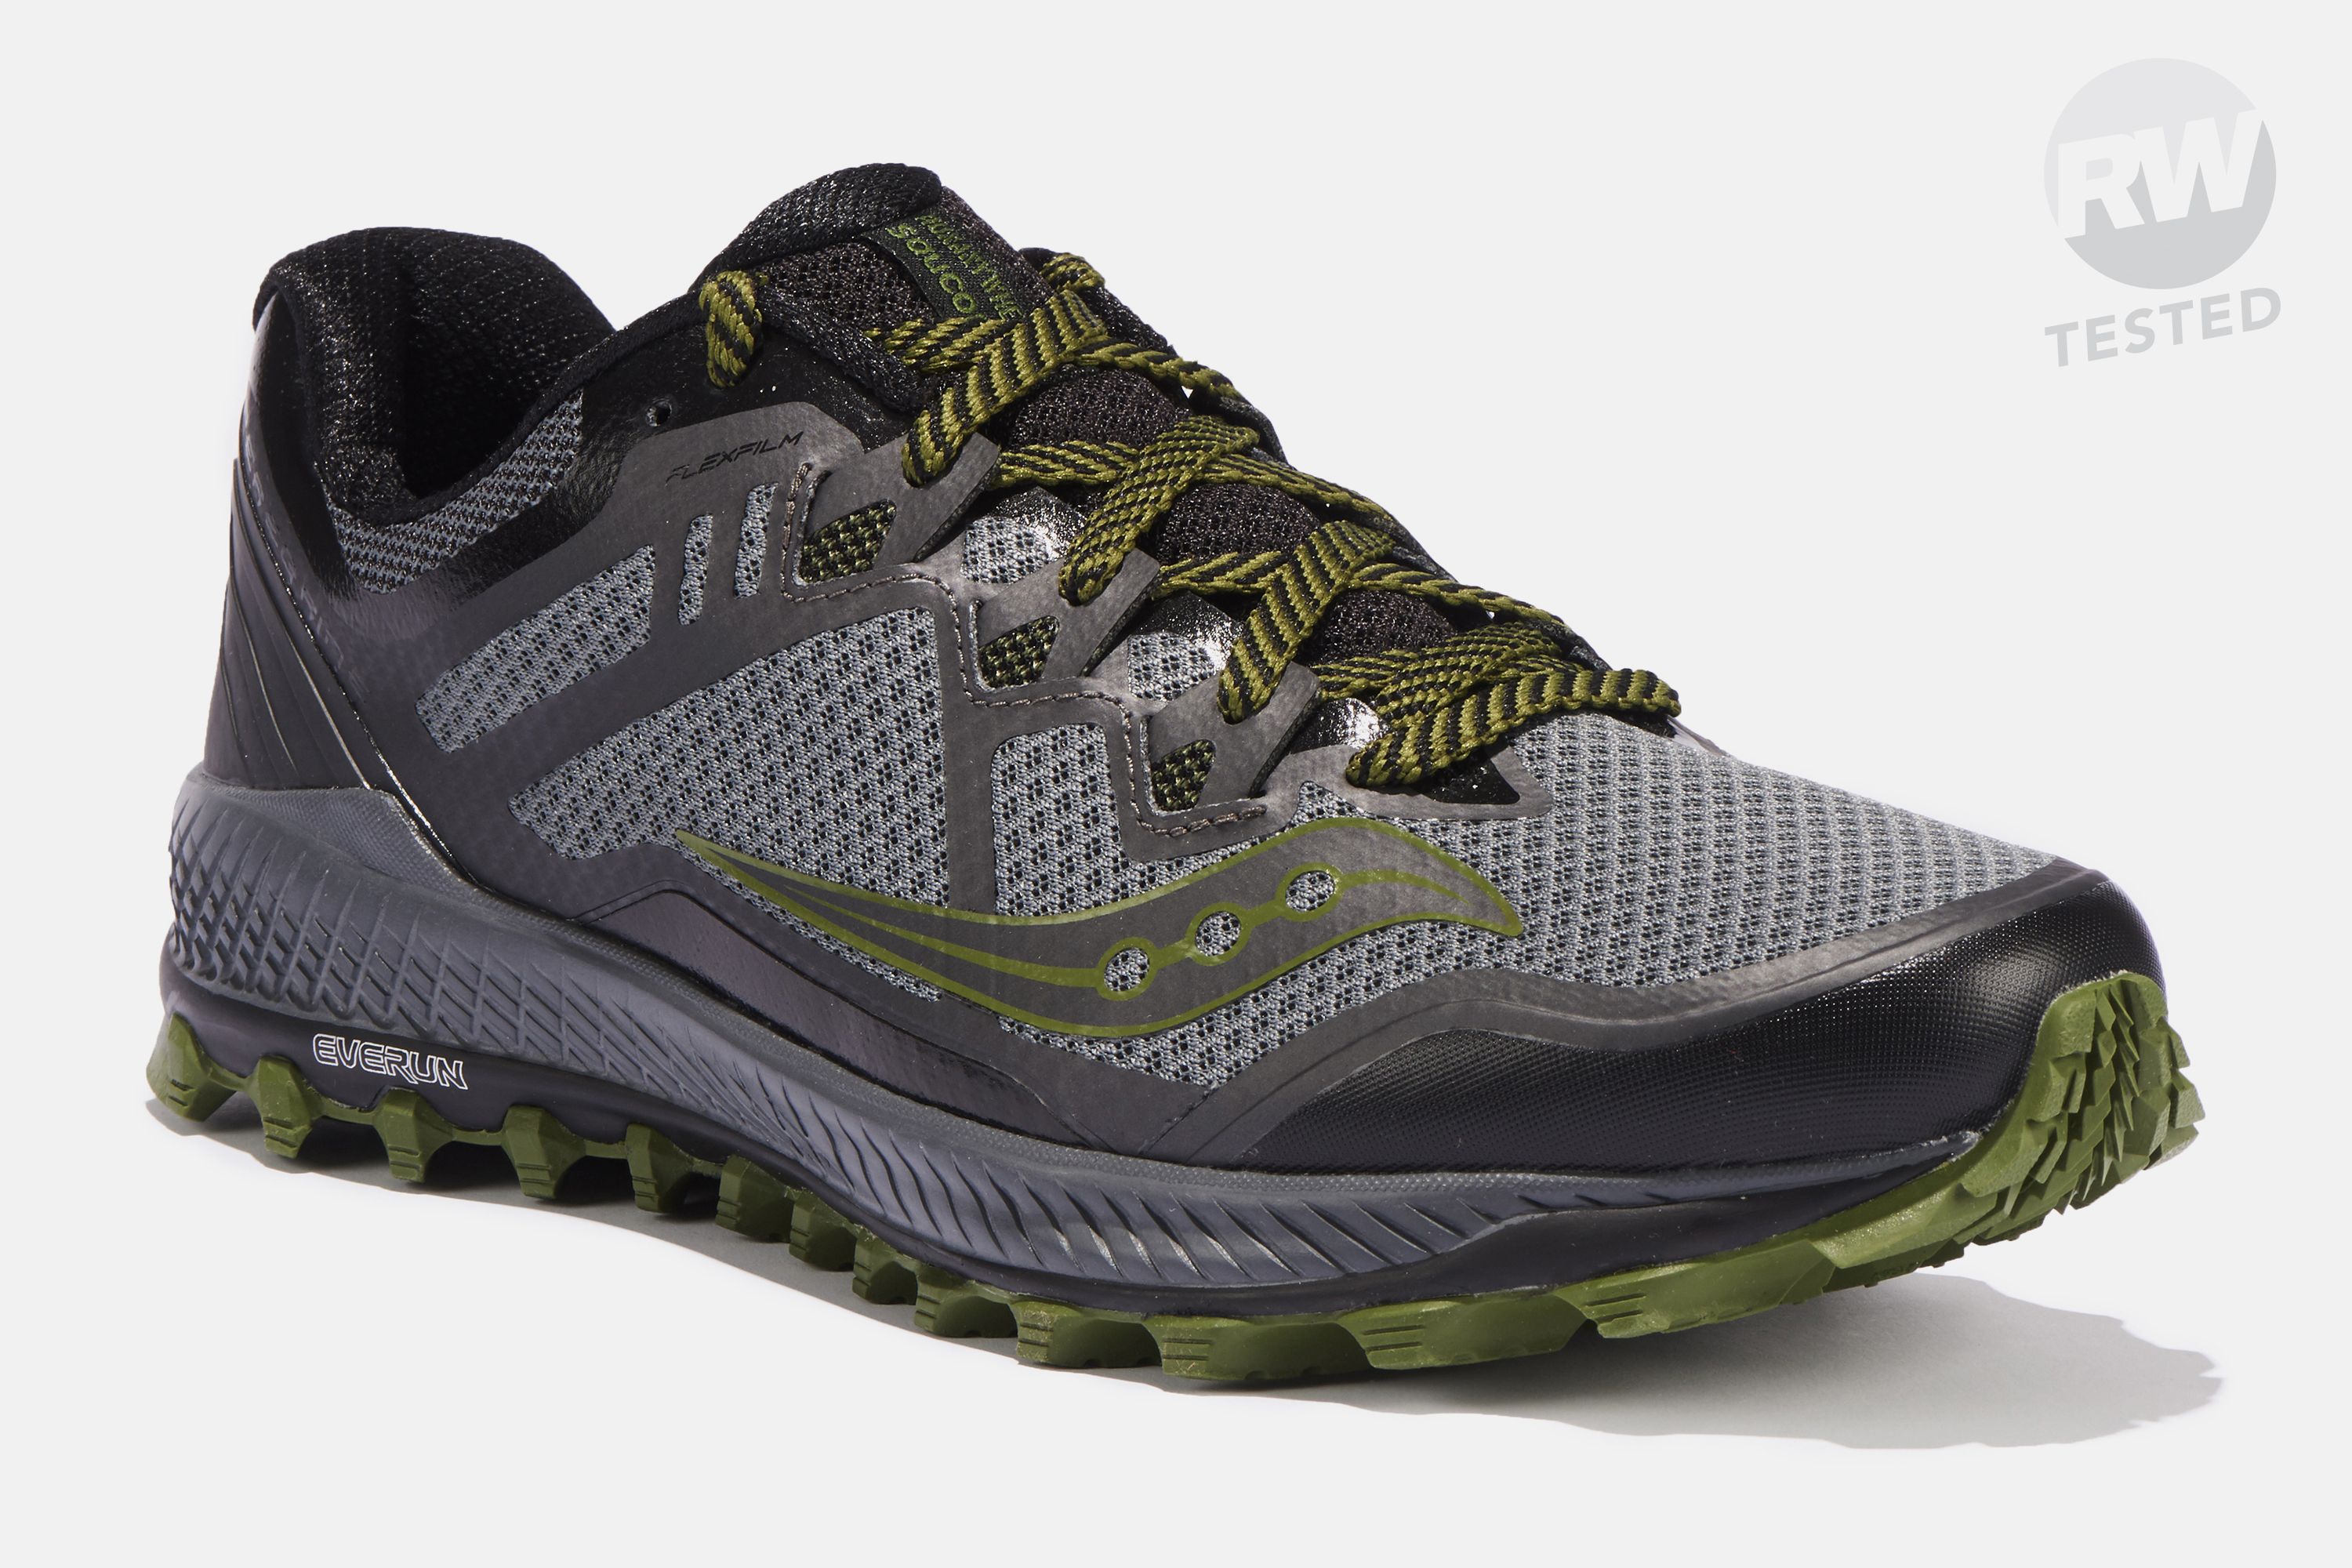 Saucony Peregrine 8 - A Trail Running 